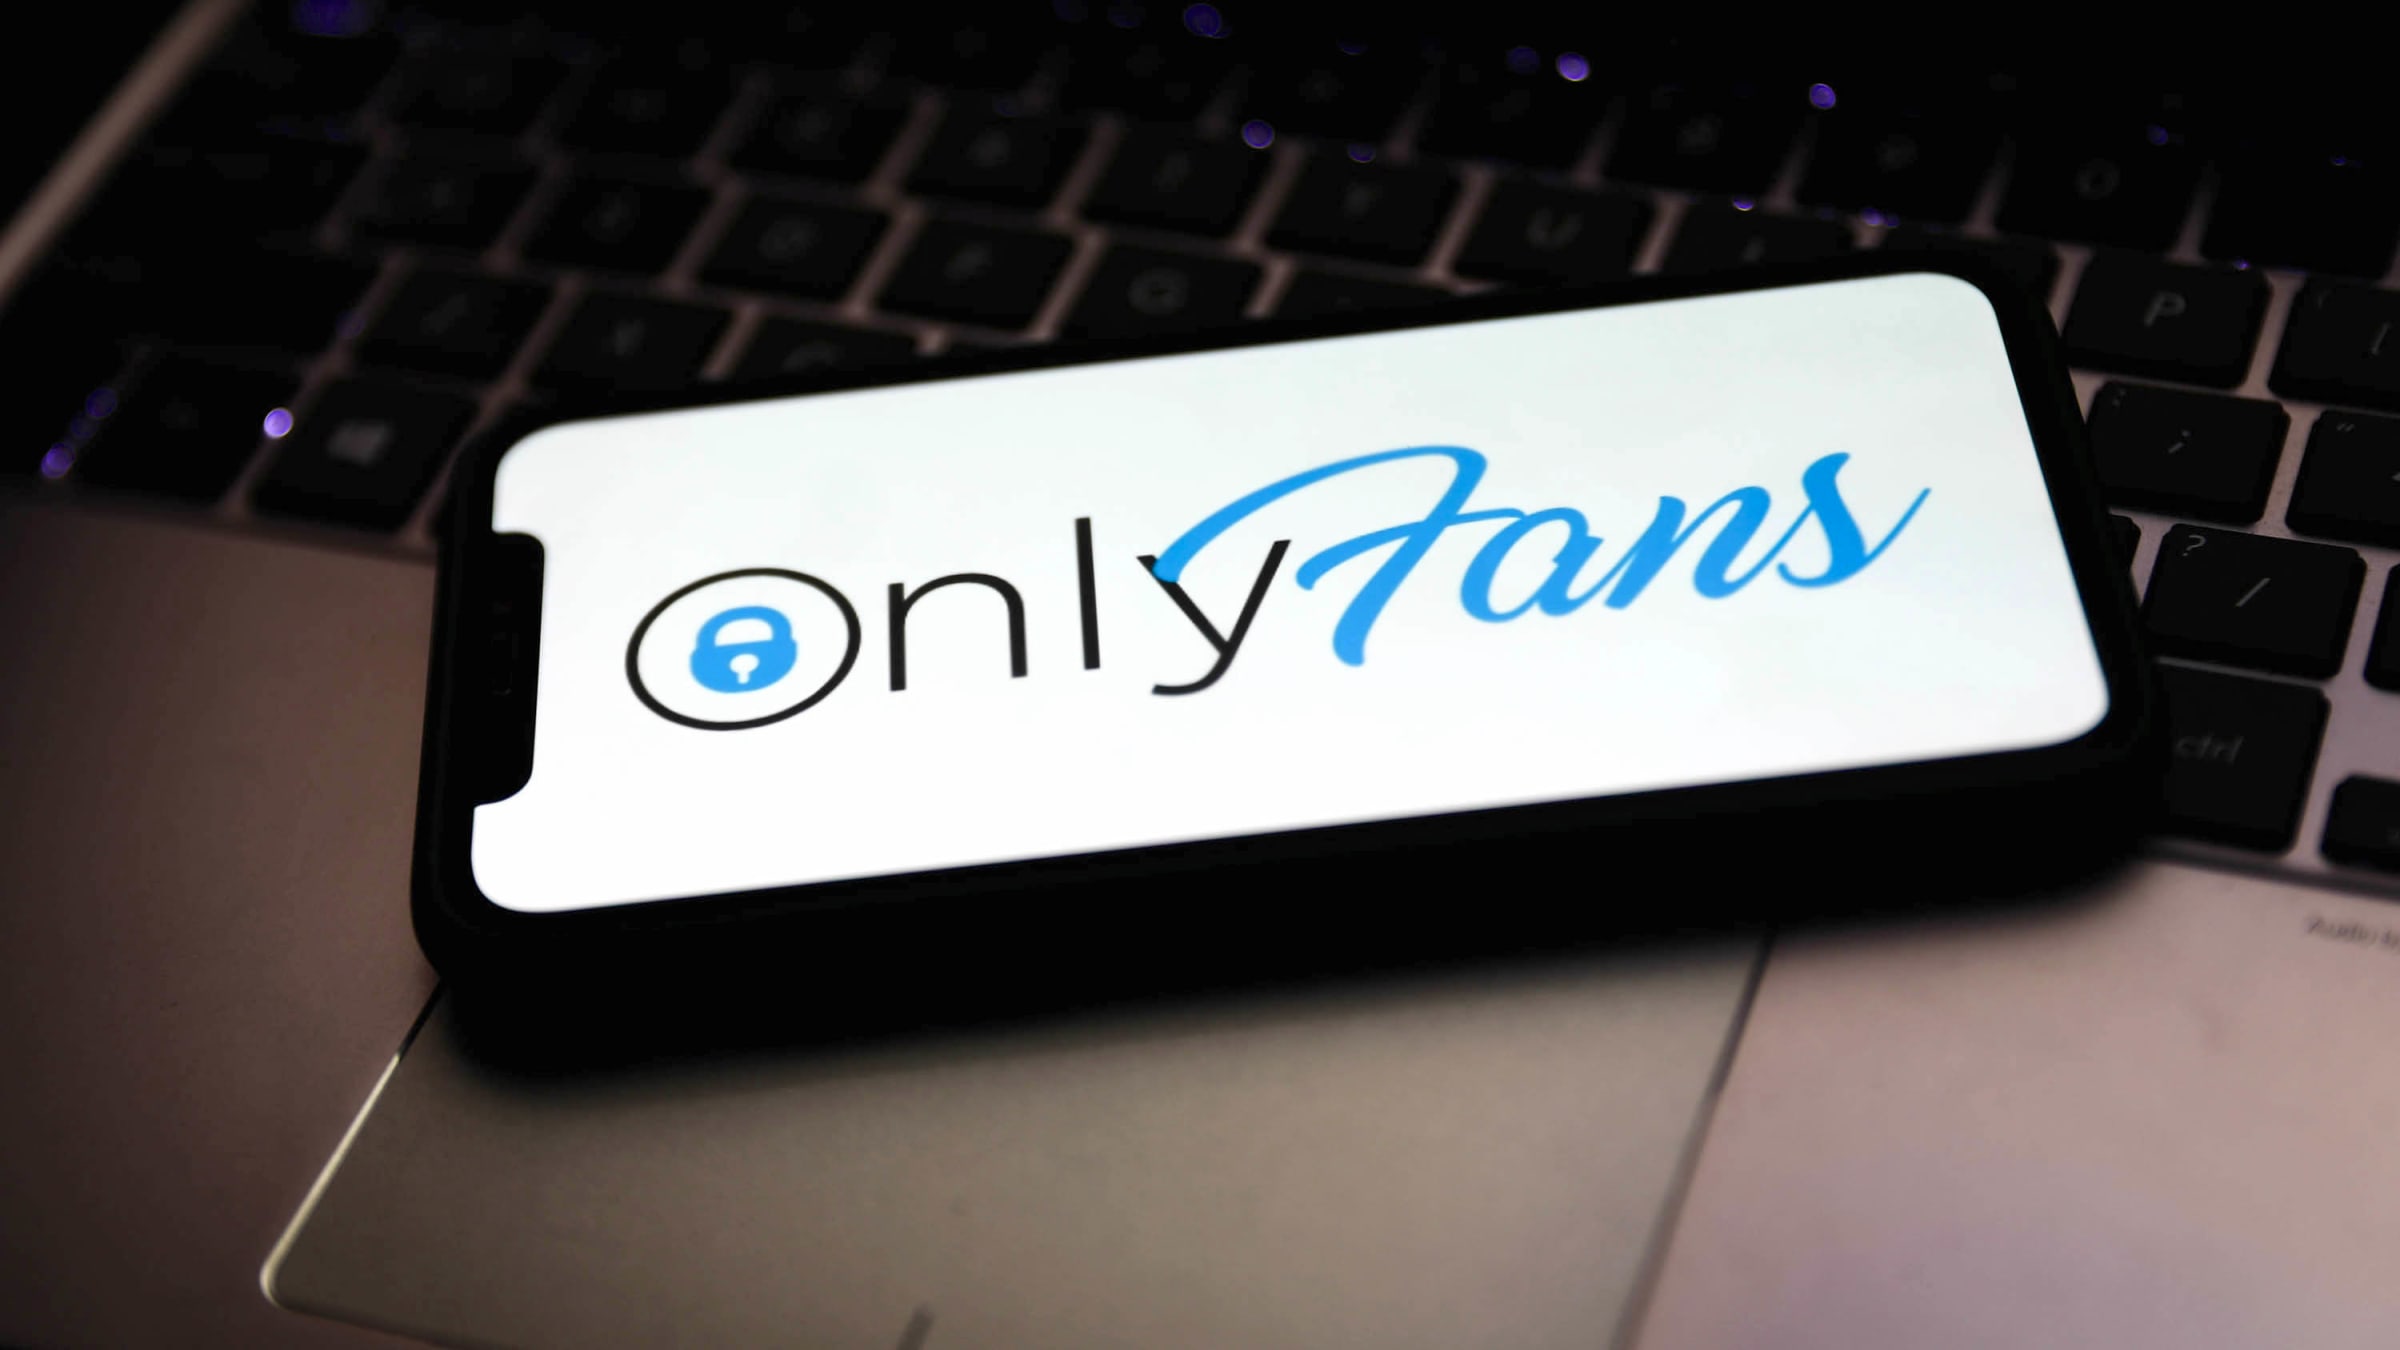 My i on how onlyfans verify card do How to